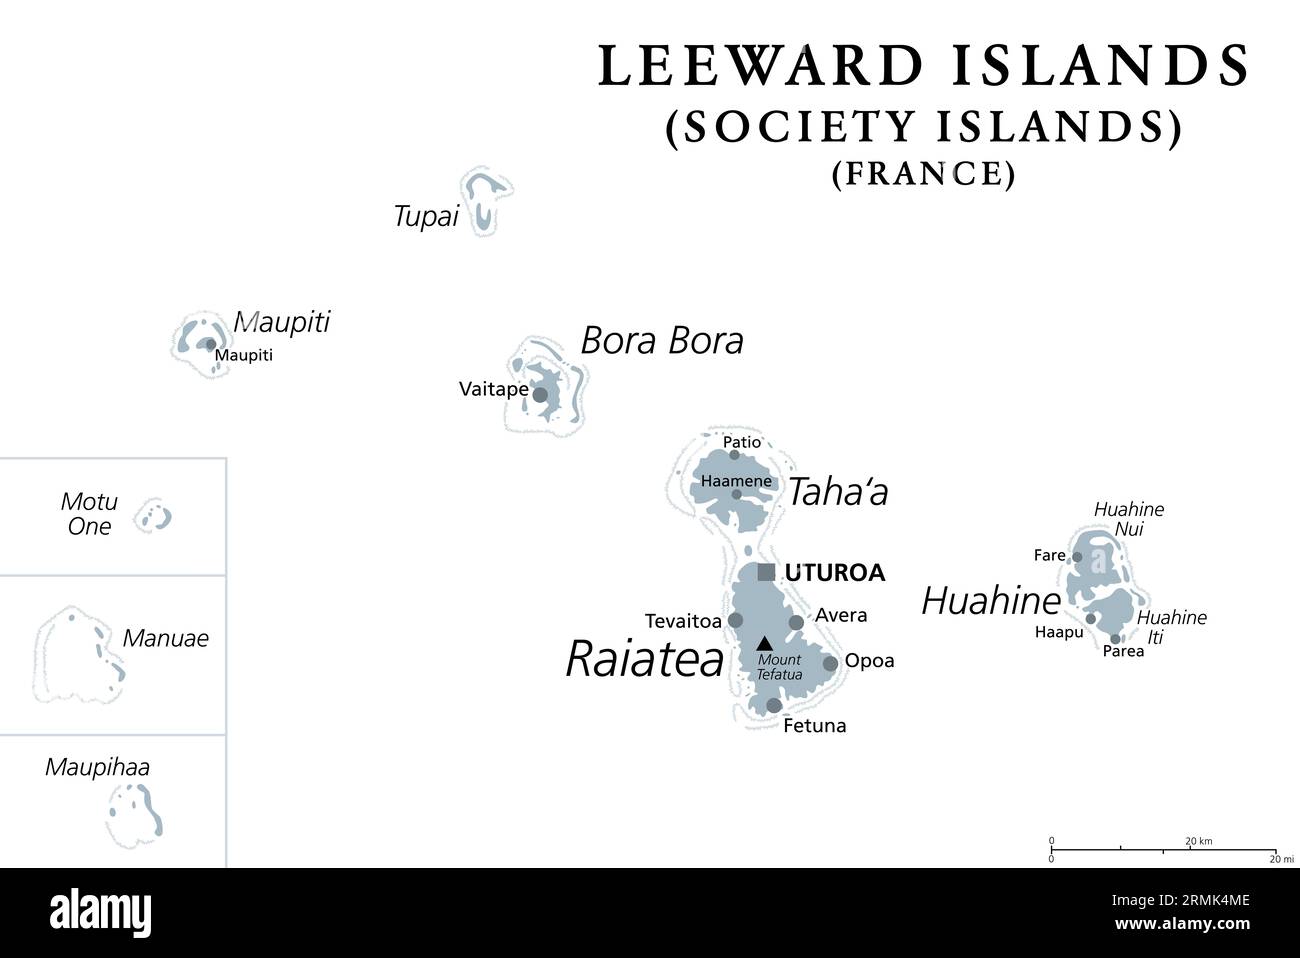 Leeward Islands, gray political map. Western part of the Society Islands in French Polynesia. Overseas collectivity of France in the South Pacific. Stock Photo